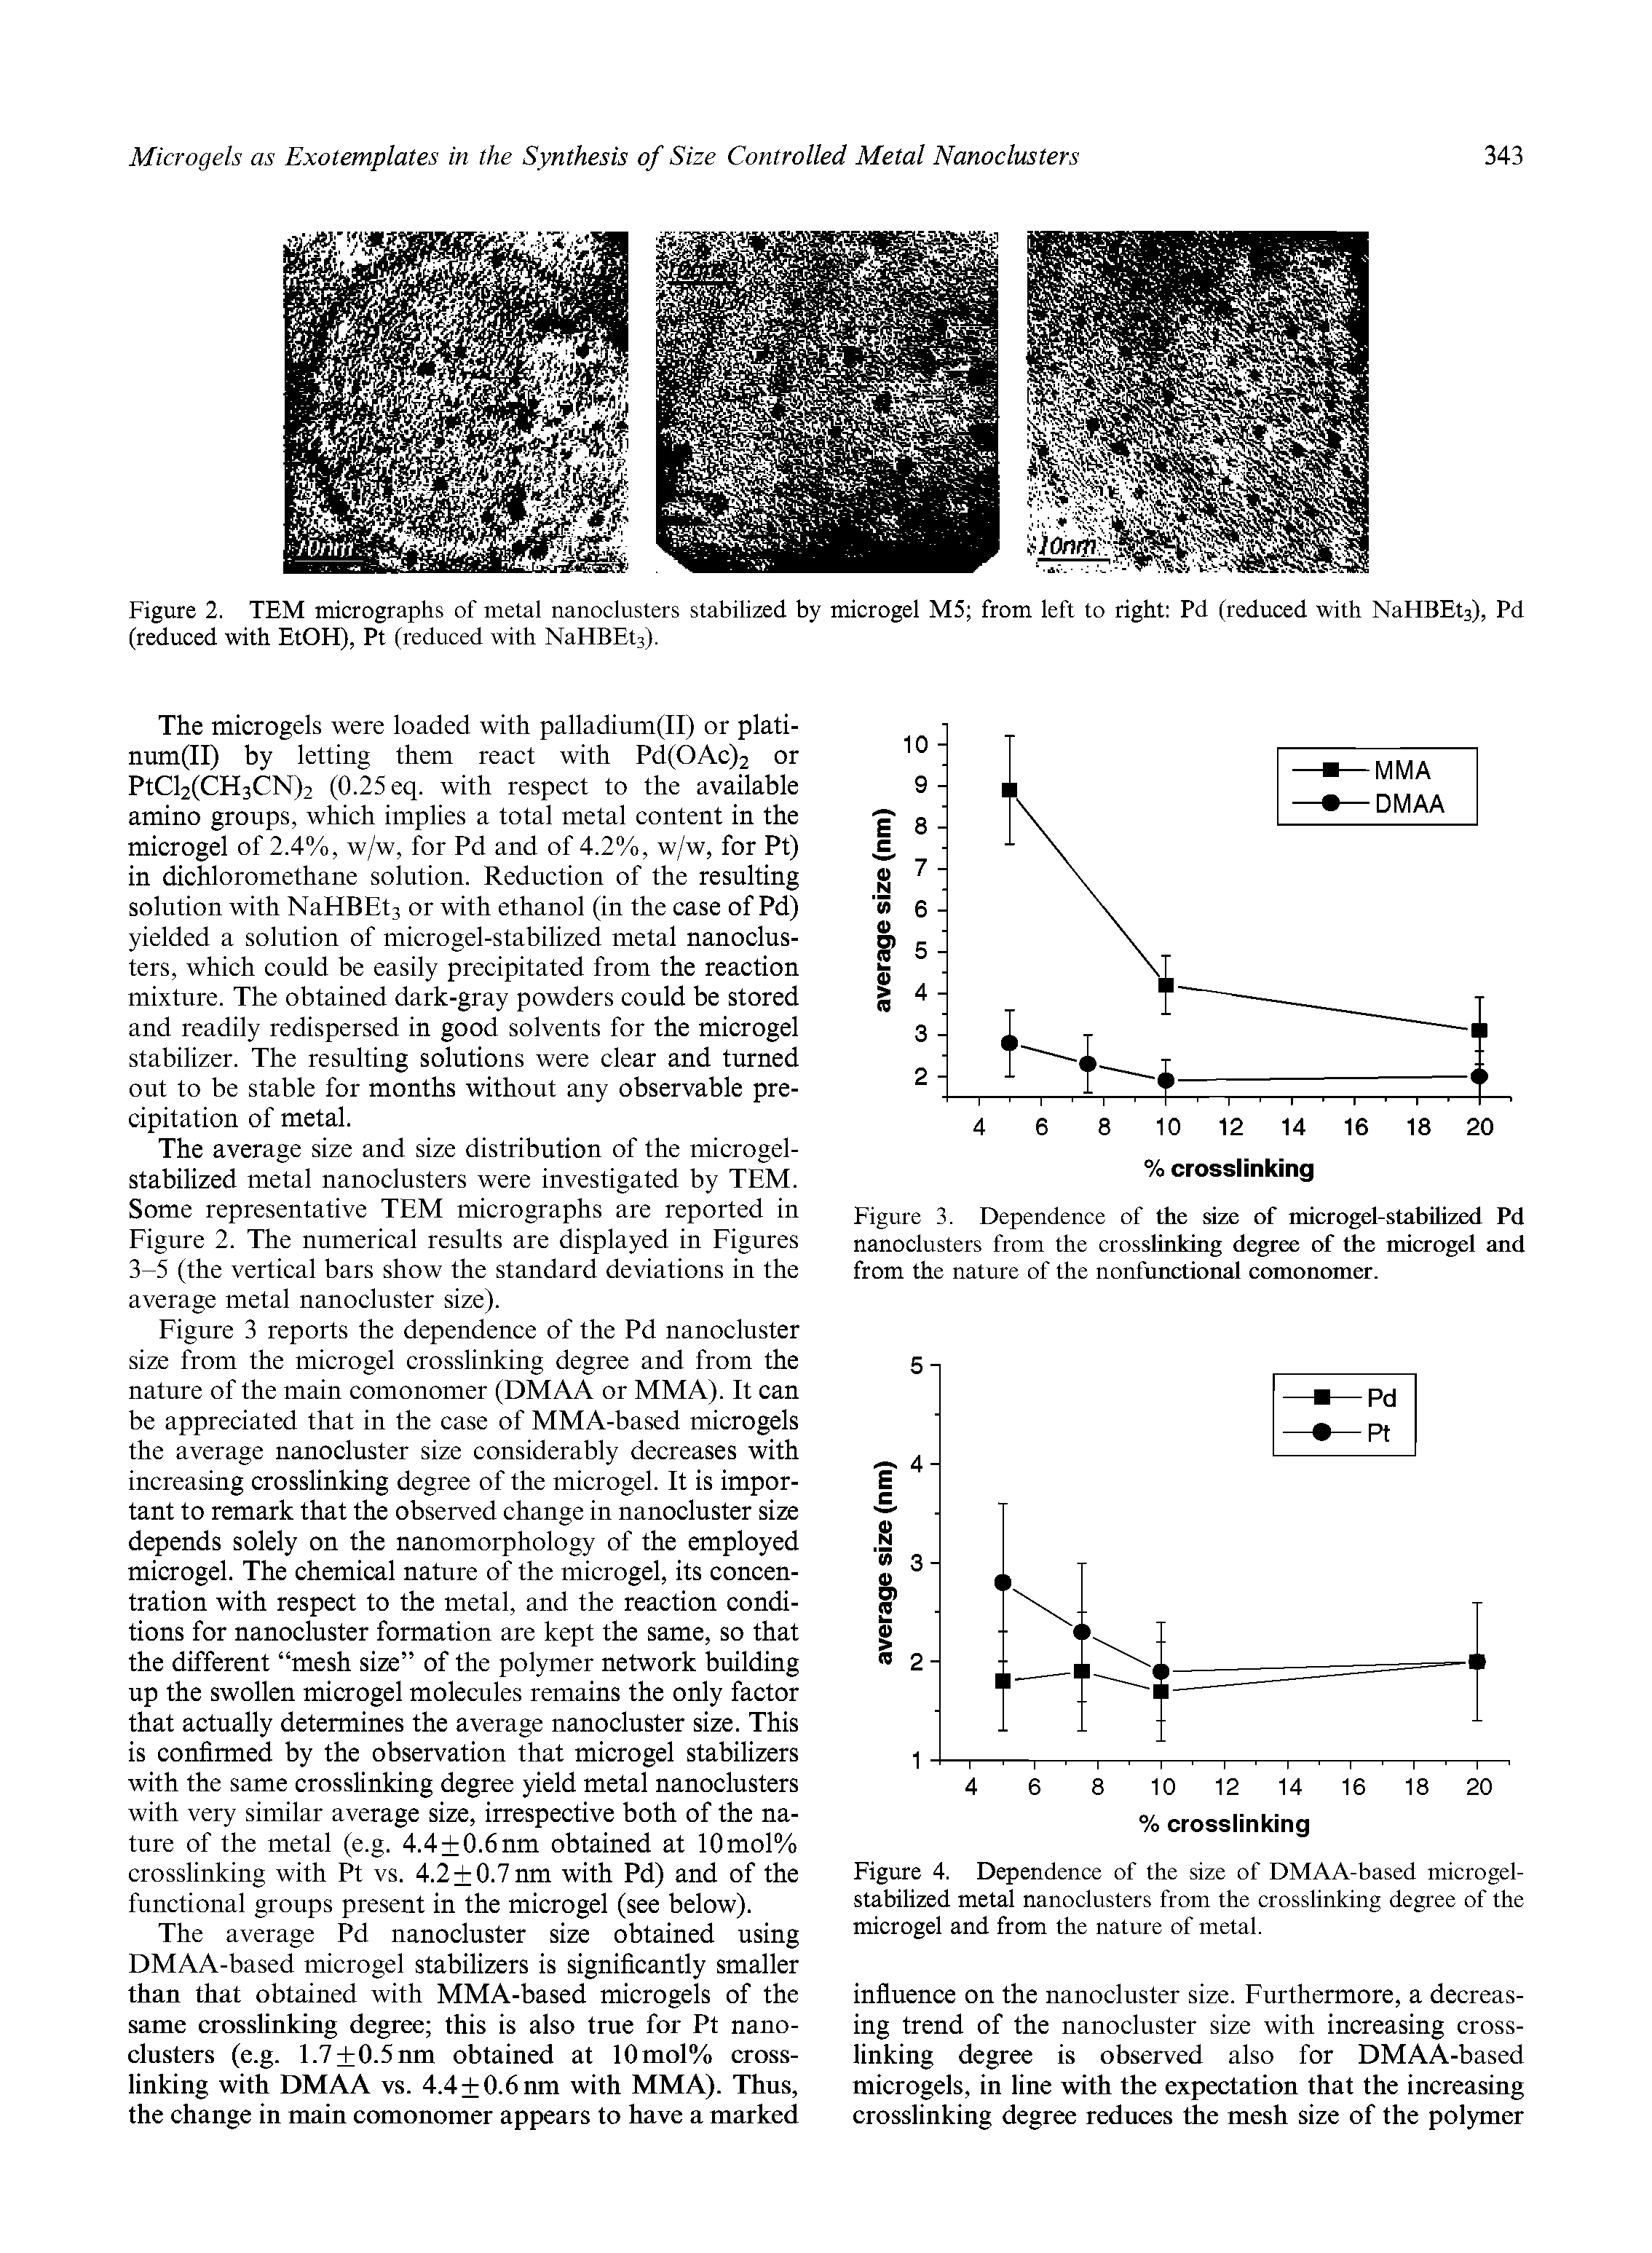 Figure 2. TEM micrographs of metal nanoclusters stabilized by microgel M5 from left to right Pd (reduced with NaHBEts), Pd (reduced with EtOH), Pt (reduced with NaHBEts).